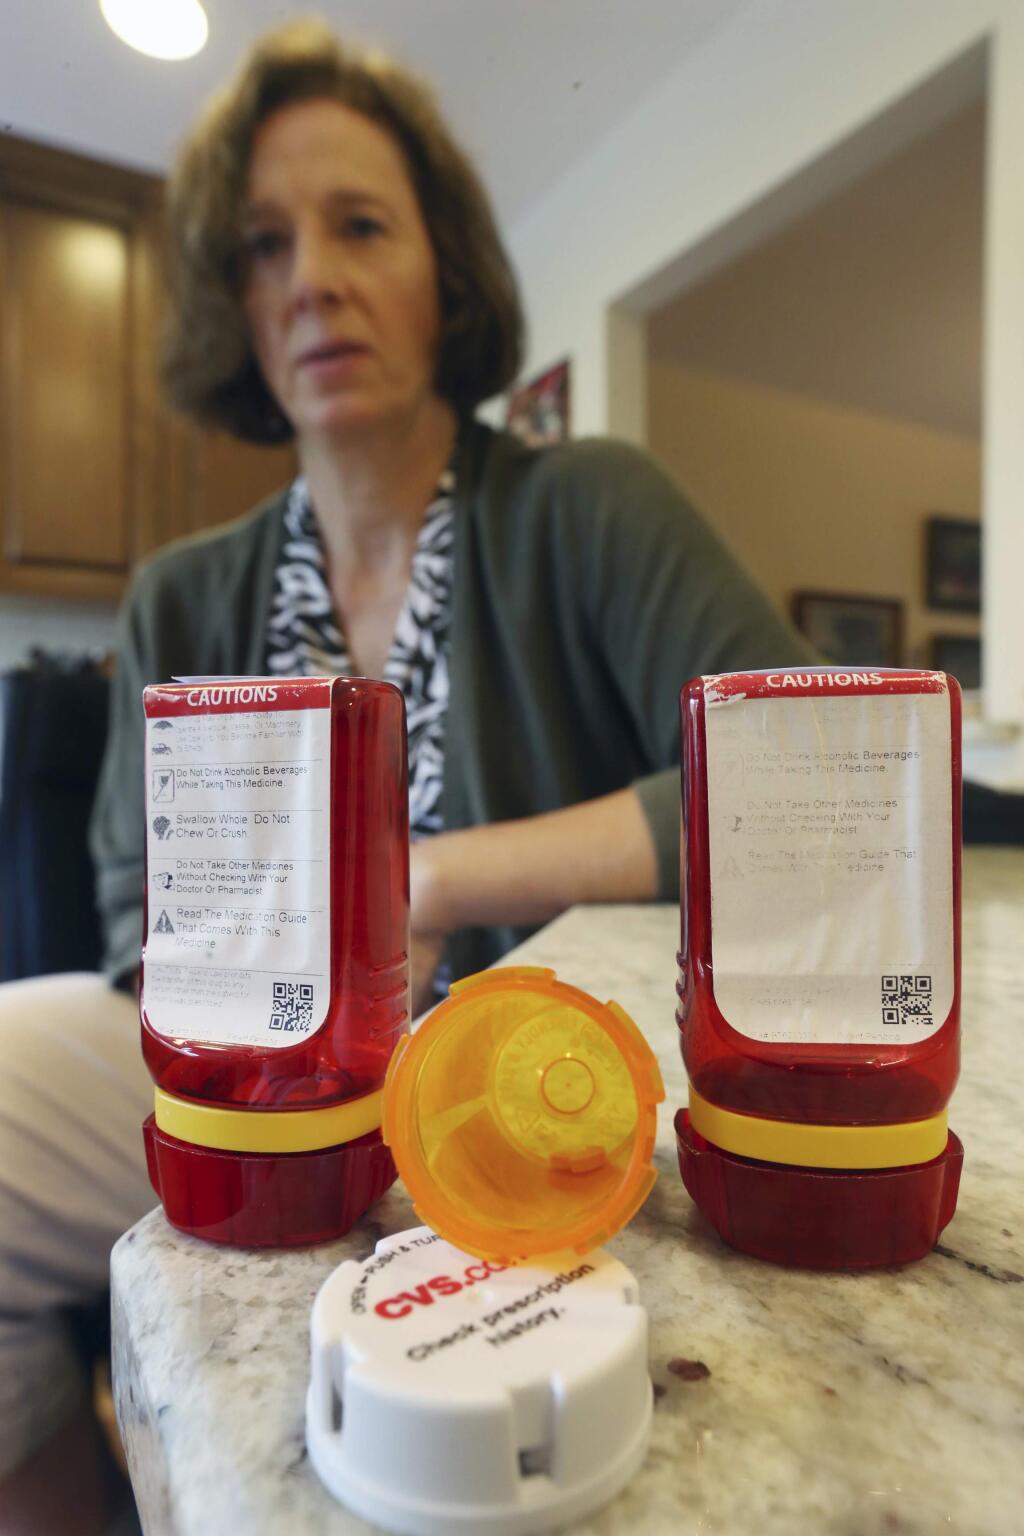 In this Sunday, Sept. 18, 2016, photo, Shelley Ewalt sits in her home, in Princeton, N.J., near an open amber-colored CVS pharmacy prescription bottle, center, and two uniquely designed red ones from Target. After CVS took over operation of Target's drugstores earlier this year, distraught customers have been asking the drugstore chain to bring back the retailer's red prescription bottles, which came with color-coded rings, labeling on the top and prescription information that was easier to read. Ewalt tweeted to the drugstore chain, asking if there was any chance they might return to the design of the Target bottles, which she found easier to open. (AP Photo/Mel Evans)